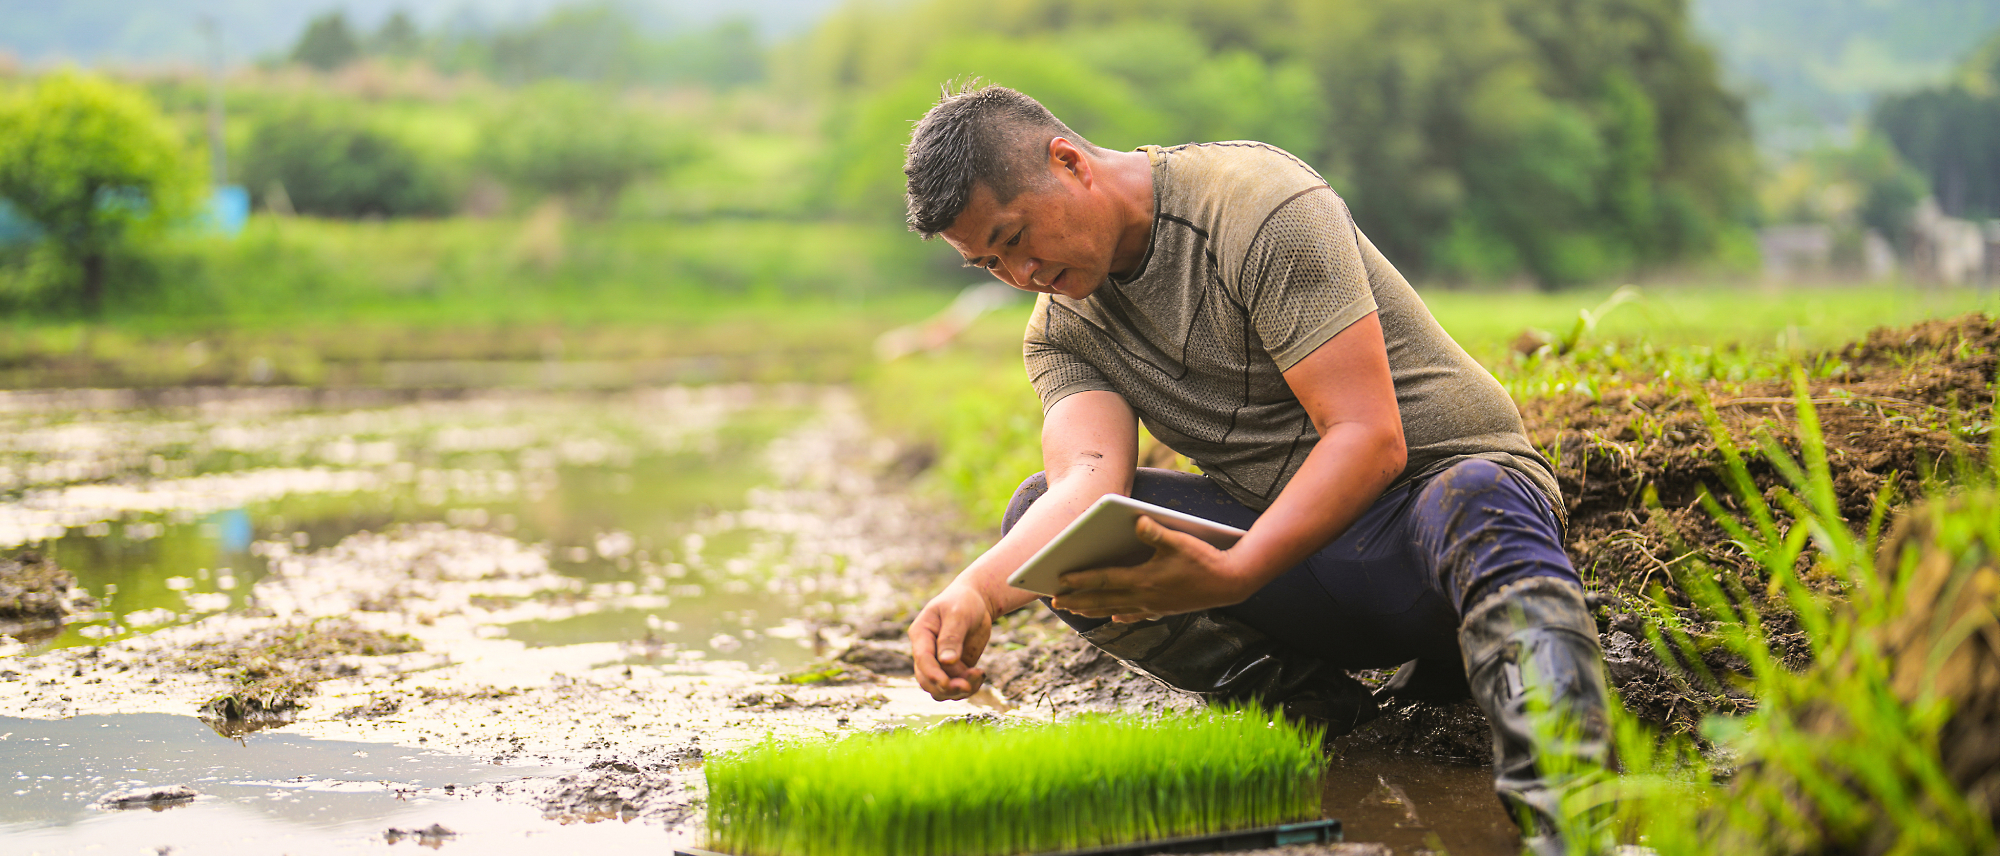 A person kneels in a rice paddy field, inspecting young rice seedlings with a tablet in hand.